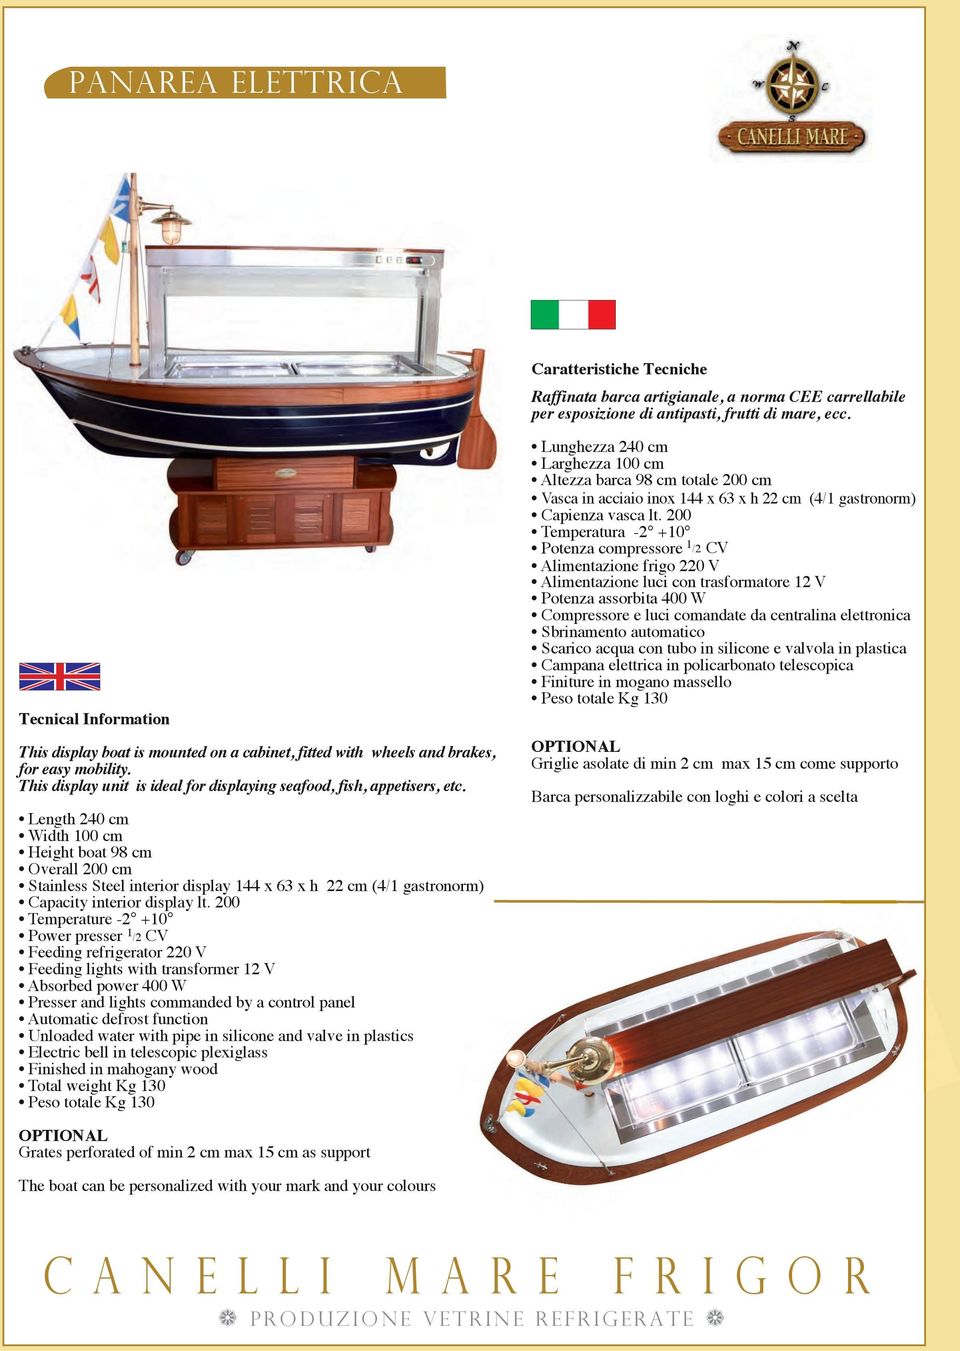 Length 240 cm Width 100 cm Height boat 98 cm Overall 200 cm Stainless Steel interior display 144 x 63 x h 22 cm (4/1 gastronorm) Capacity interior display lt.